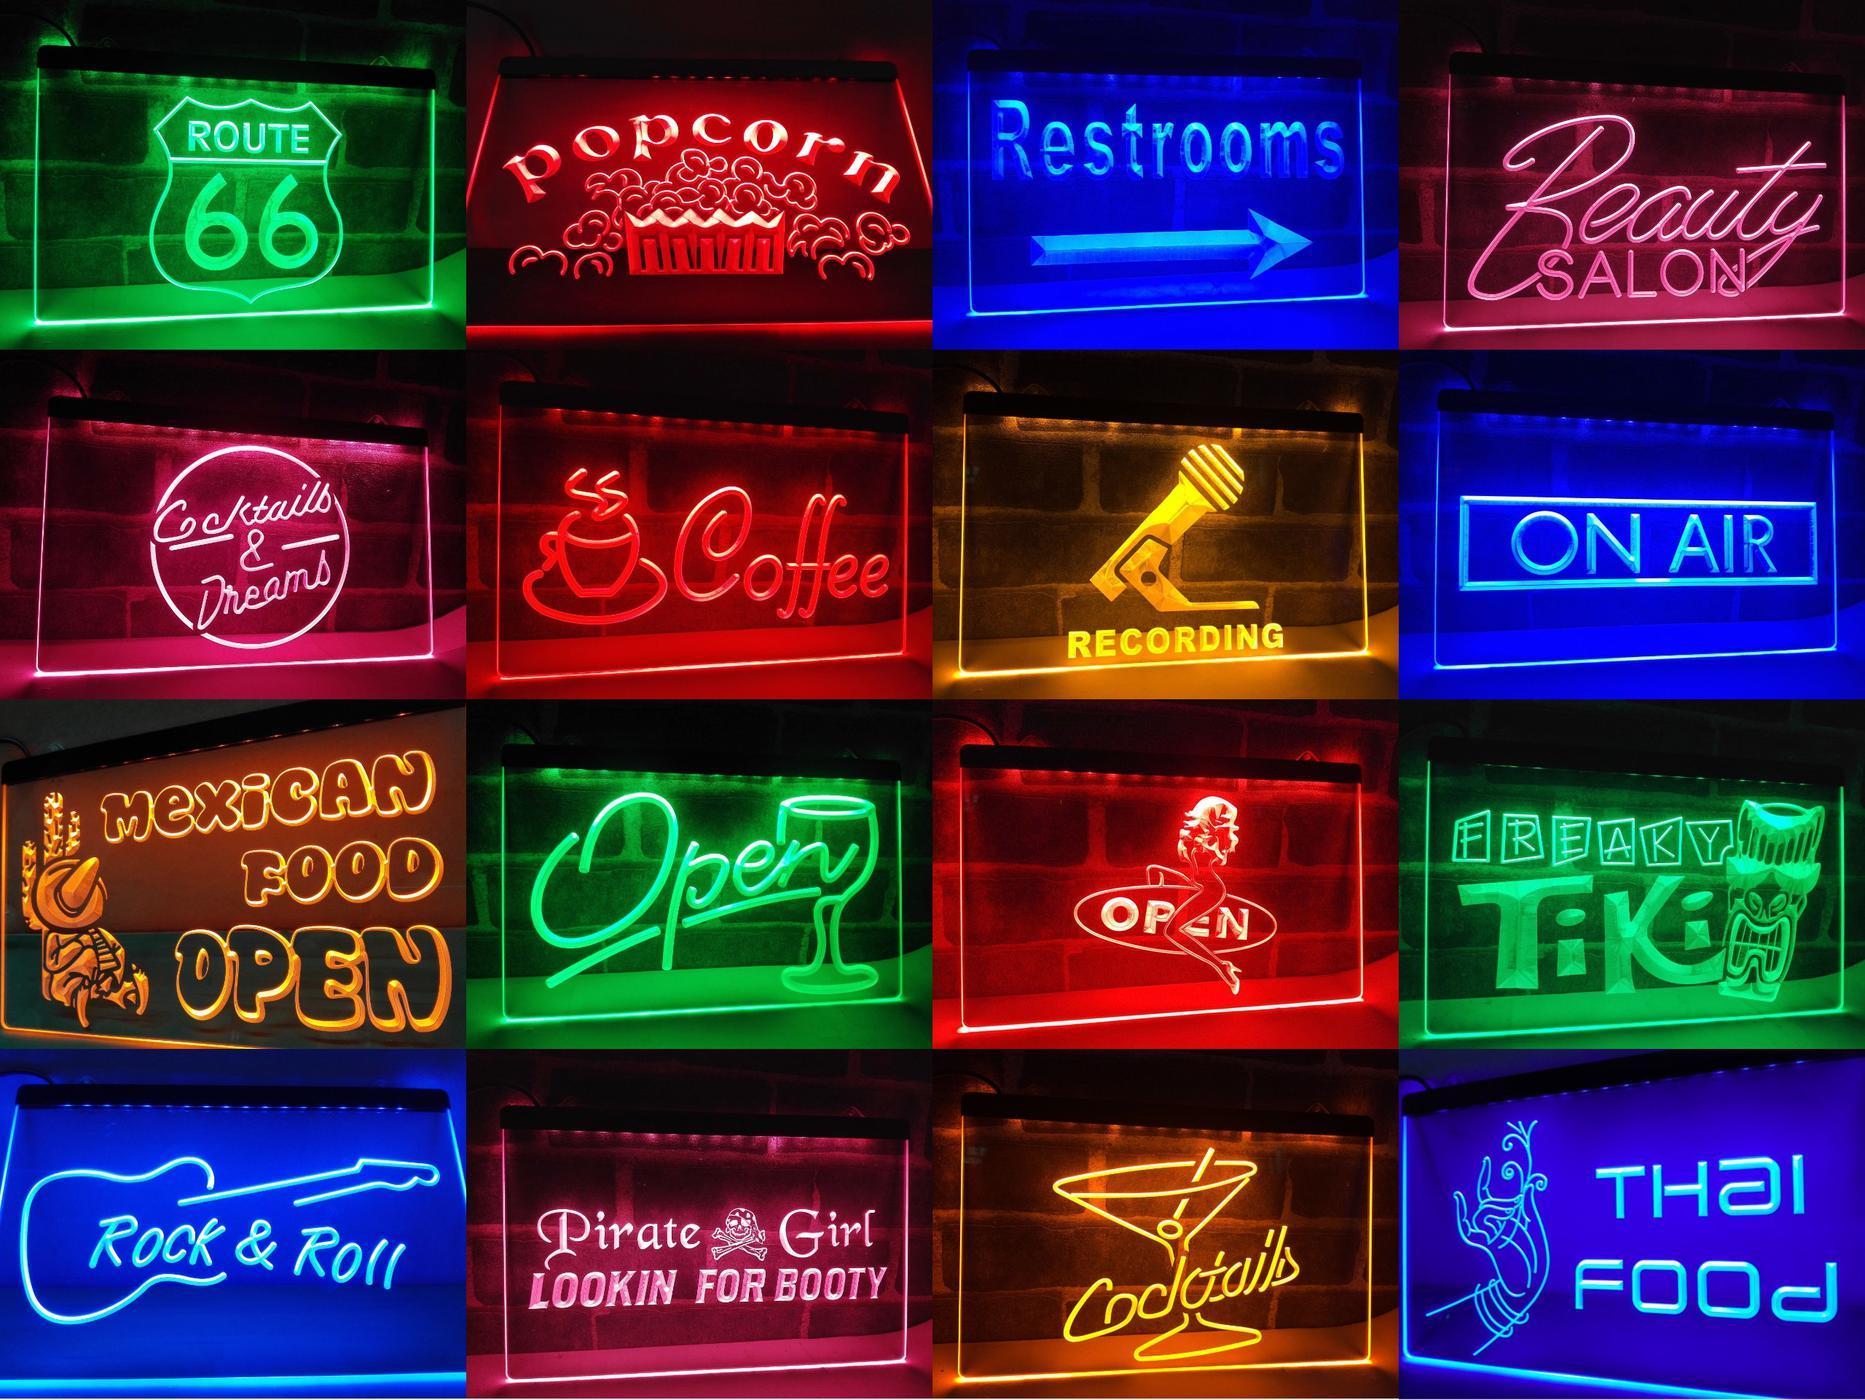 Unisex Toilet Restroom LED Neon Light Sign - Way Up Gifts